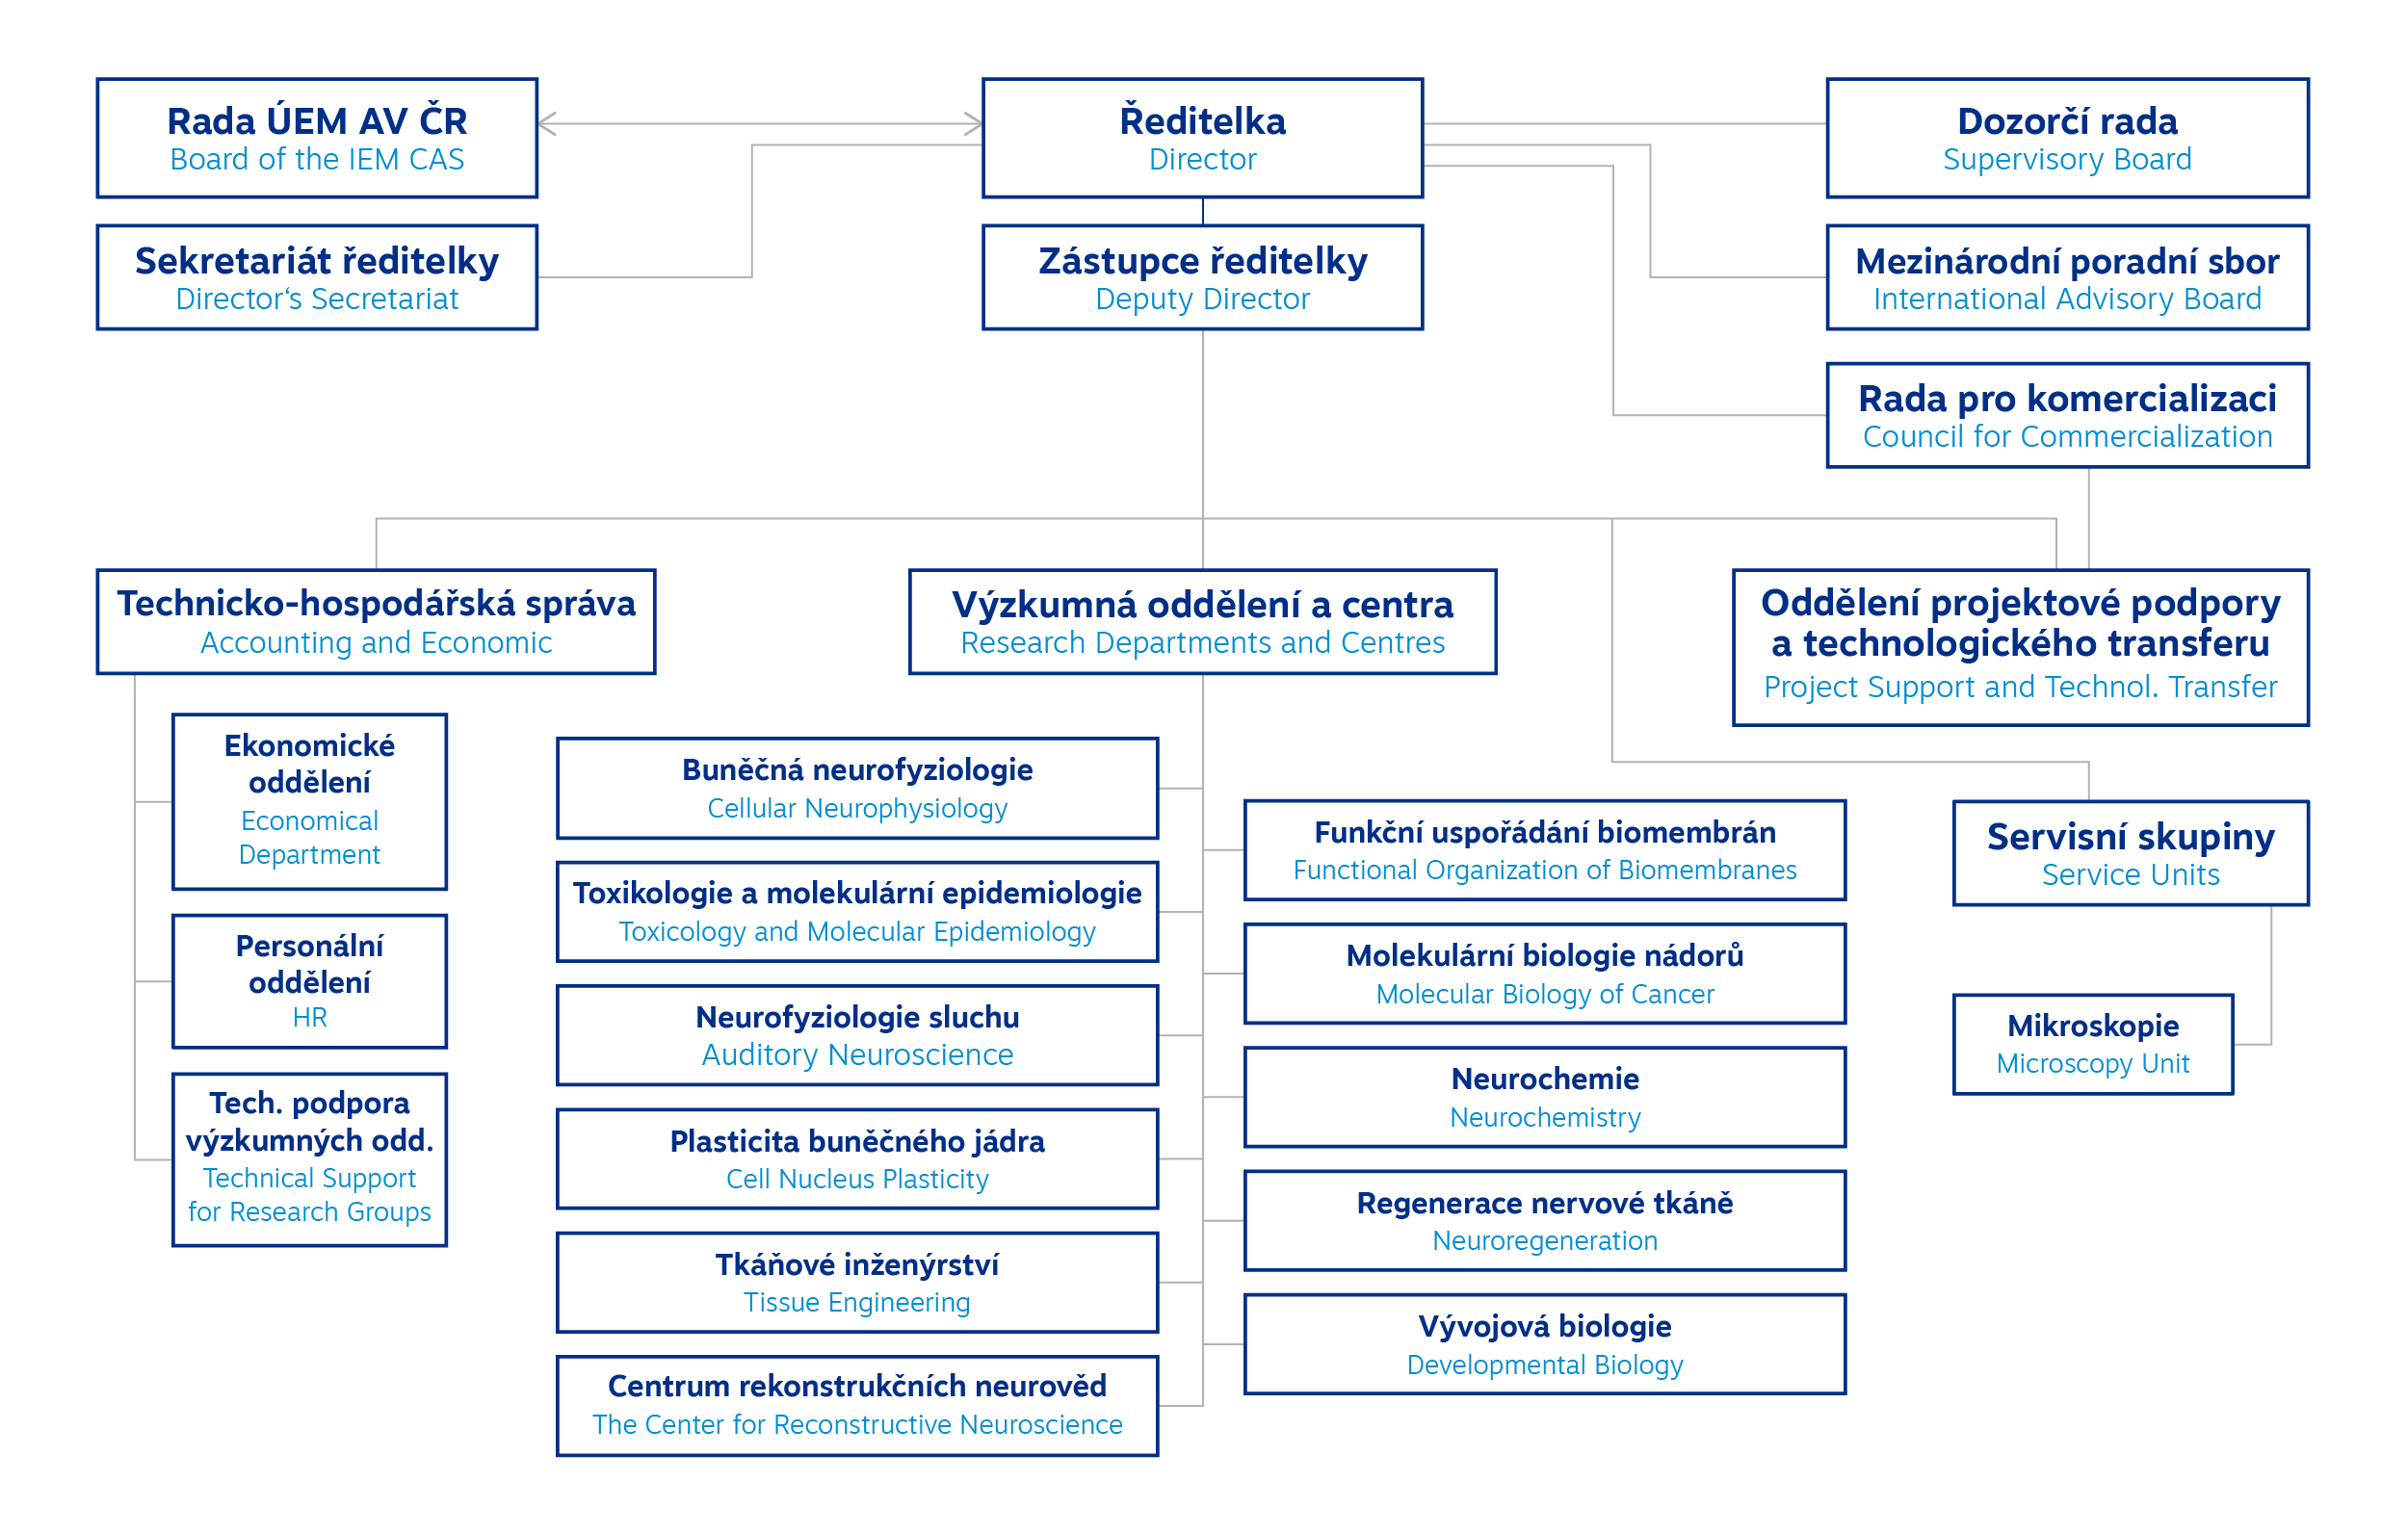 Organizational scheme of the Institute of Experimental Medicine, describing the management, research and technical departments and their relationships. Detailed description is in the picture description.